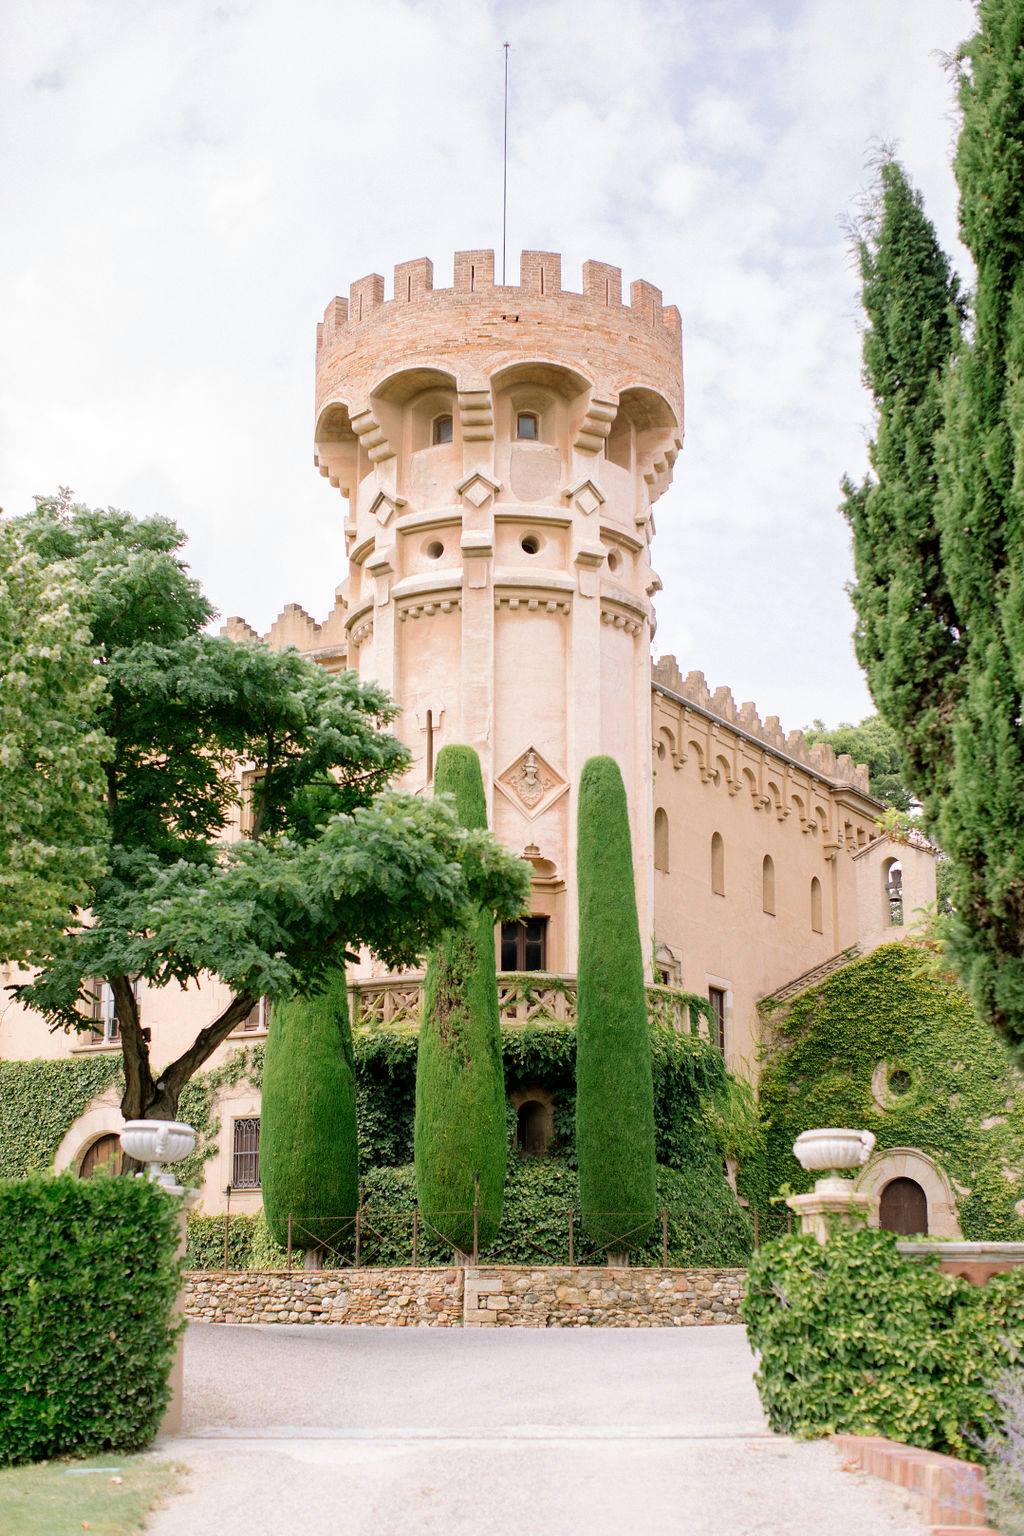 The romantic castle is just 25 minutes from downtown Barcelona